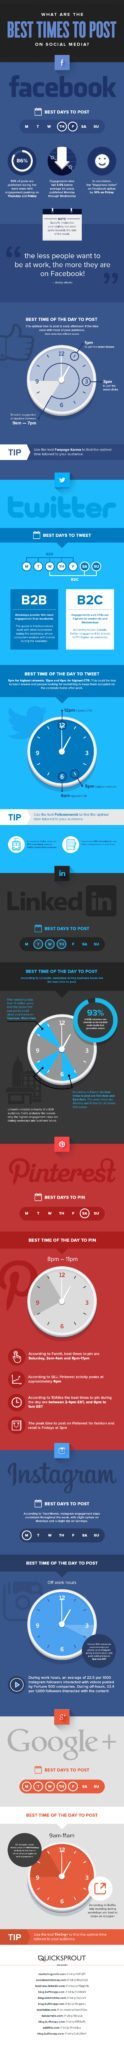 The Best Times To Increase Social Media Engagement